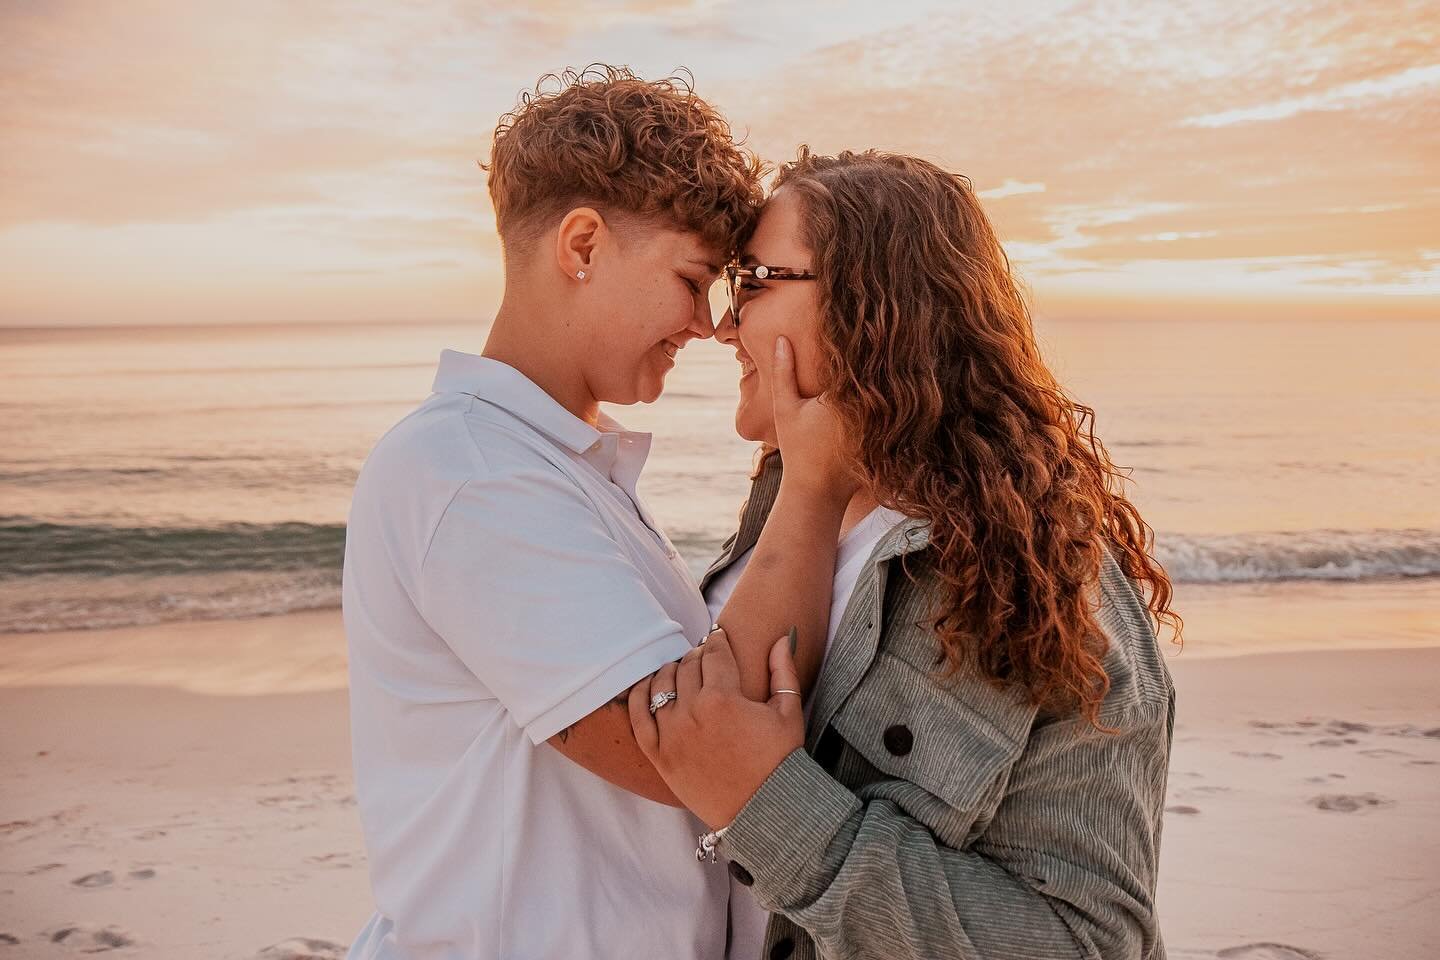 this sunset may have been the most beautiful sunset I&rsquo;ve ever seen on our beaches 🌅 these two beauties made it even more special! thank you to Taylor and Cass for allowing me to capture these beautiful memories! 🤍🫶🏻
&hellip;&hellip;&hellip;